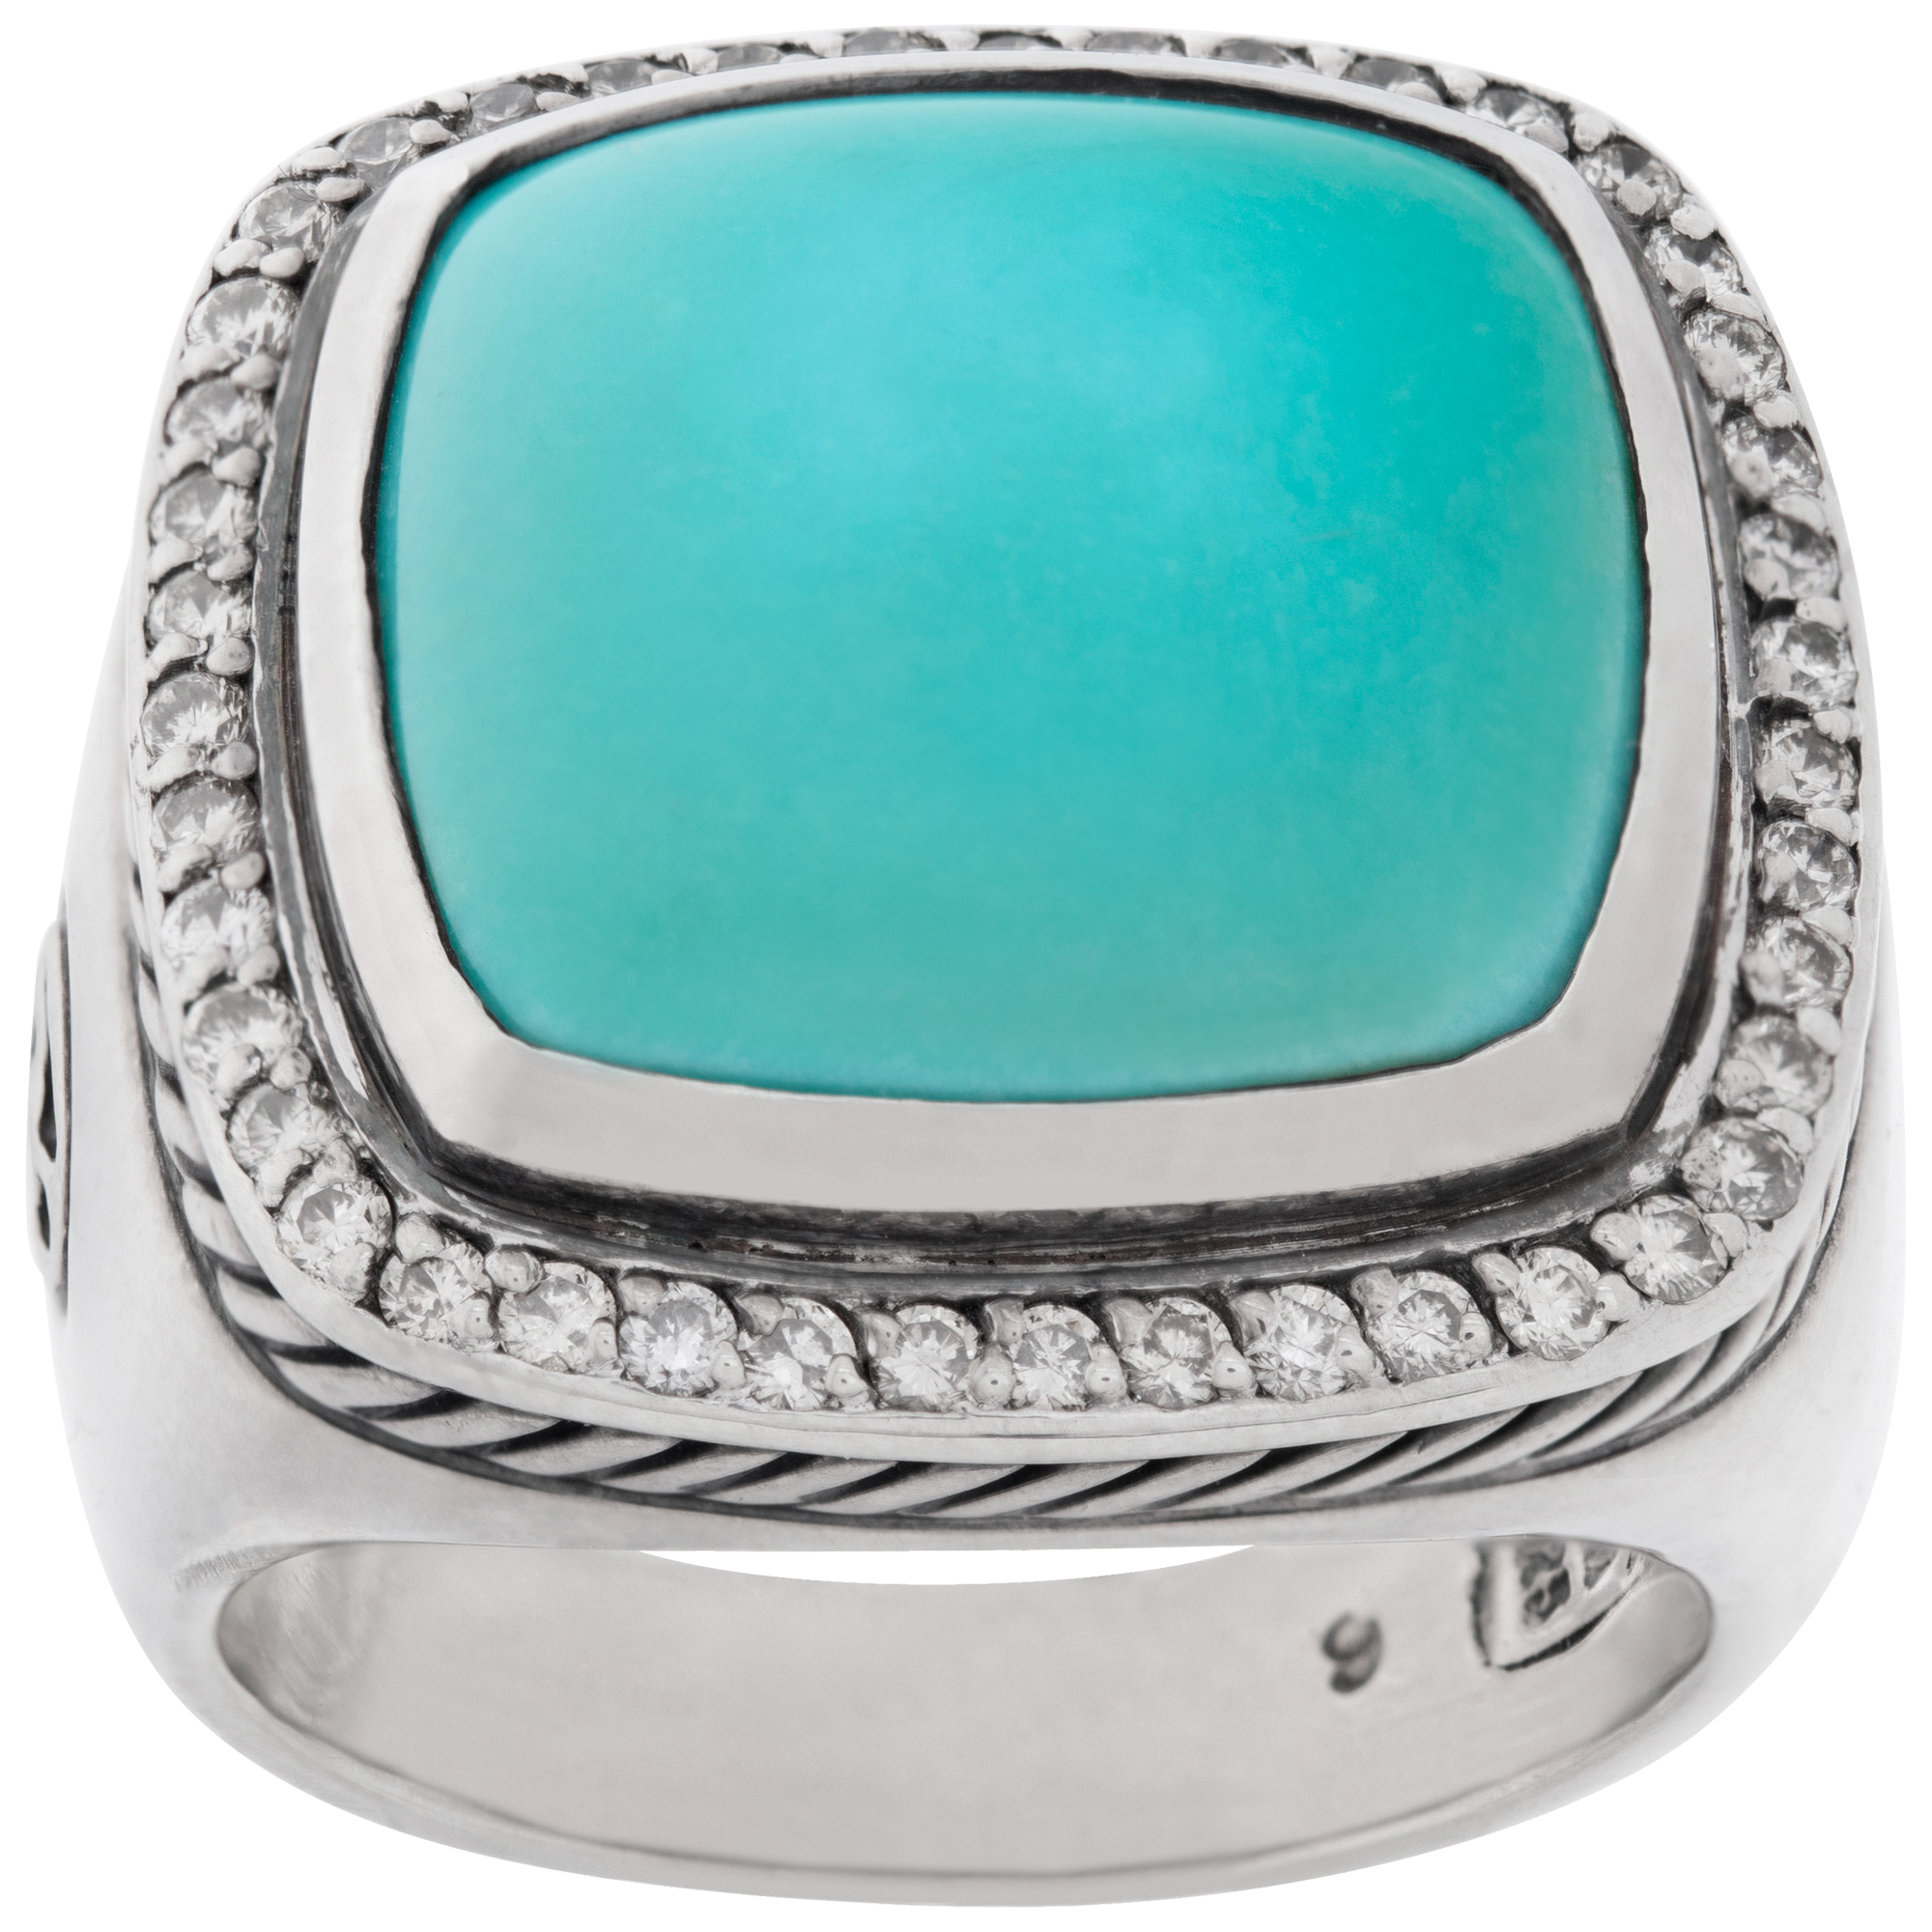 David Yurman Turquoise Albion ring in sterling silver ring with diamond accents